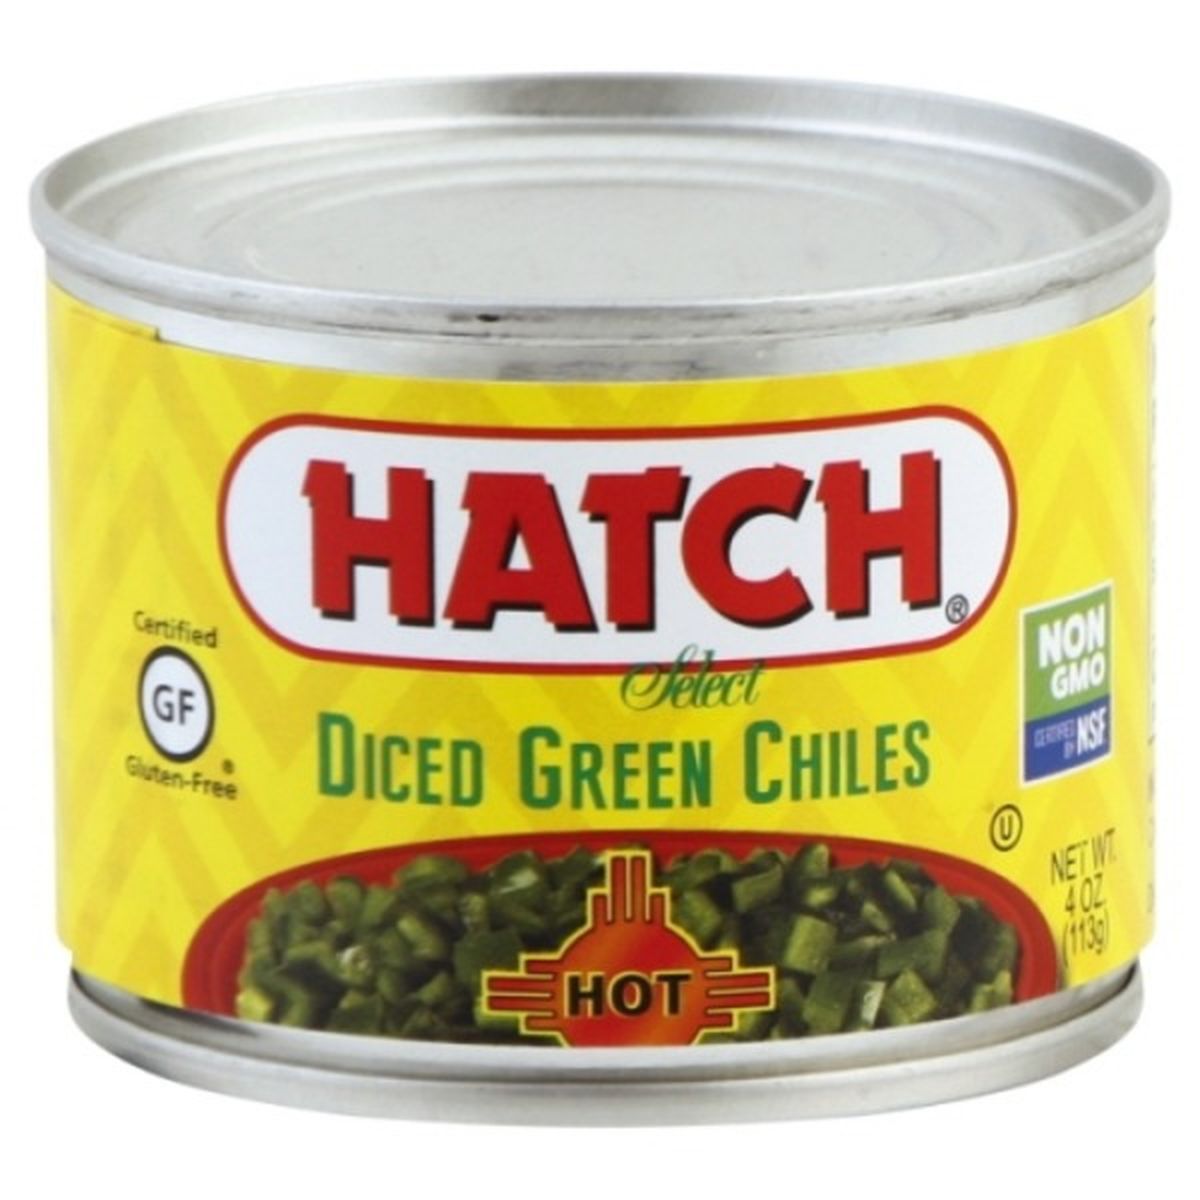 Calories in HATCH Green Chiles, Hot, Dice